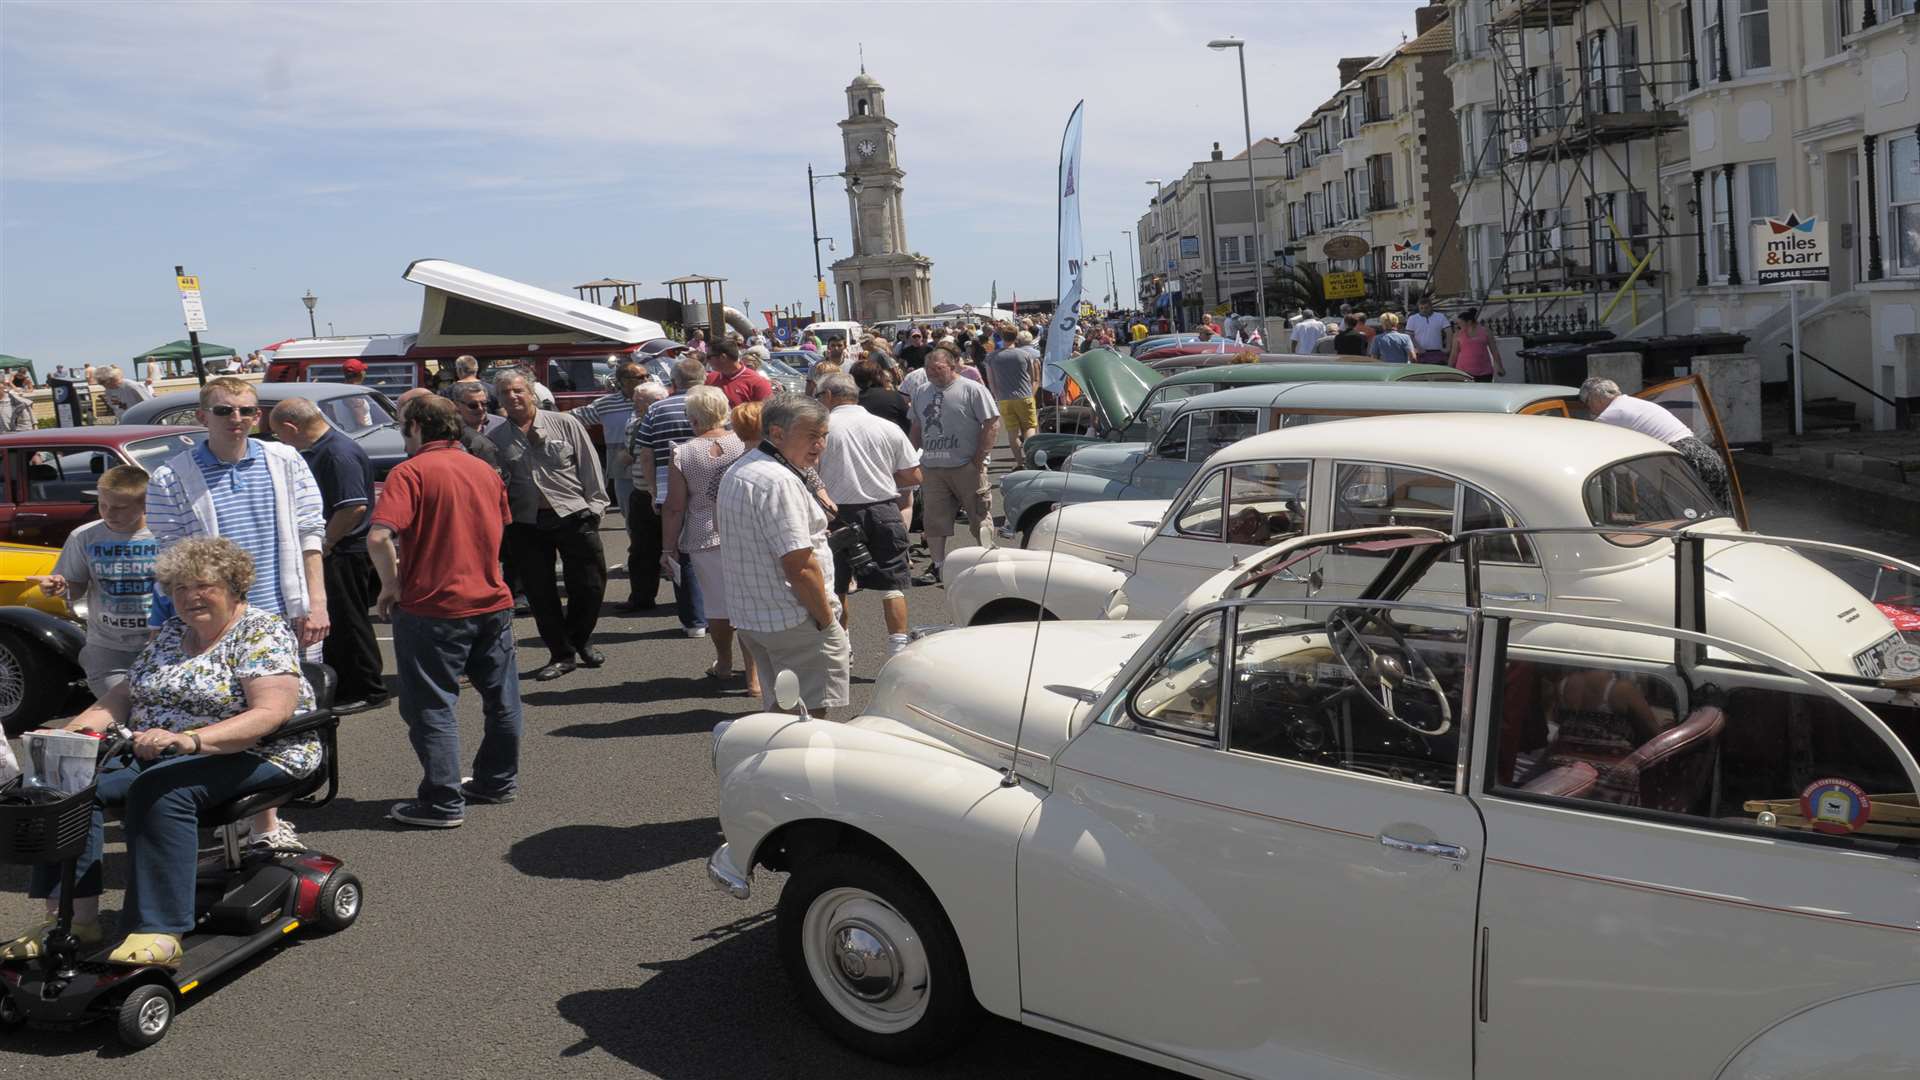 The motor show was due to be held in Central Parade